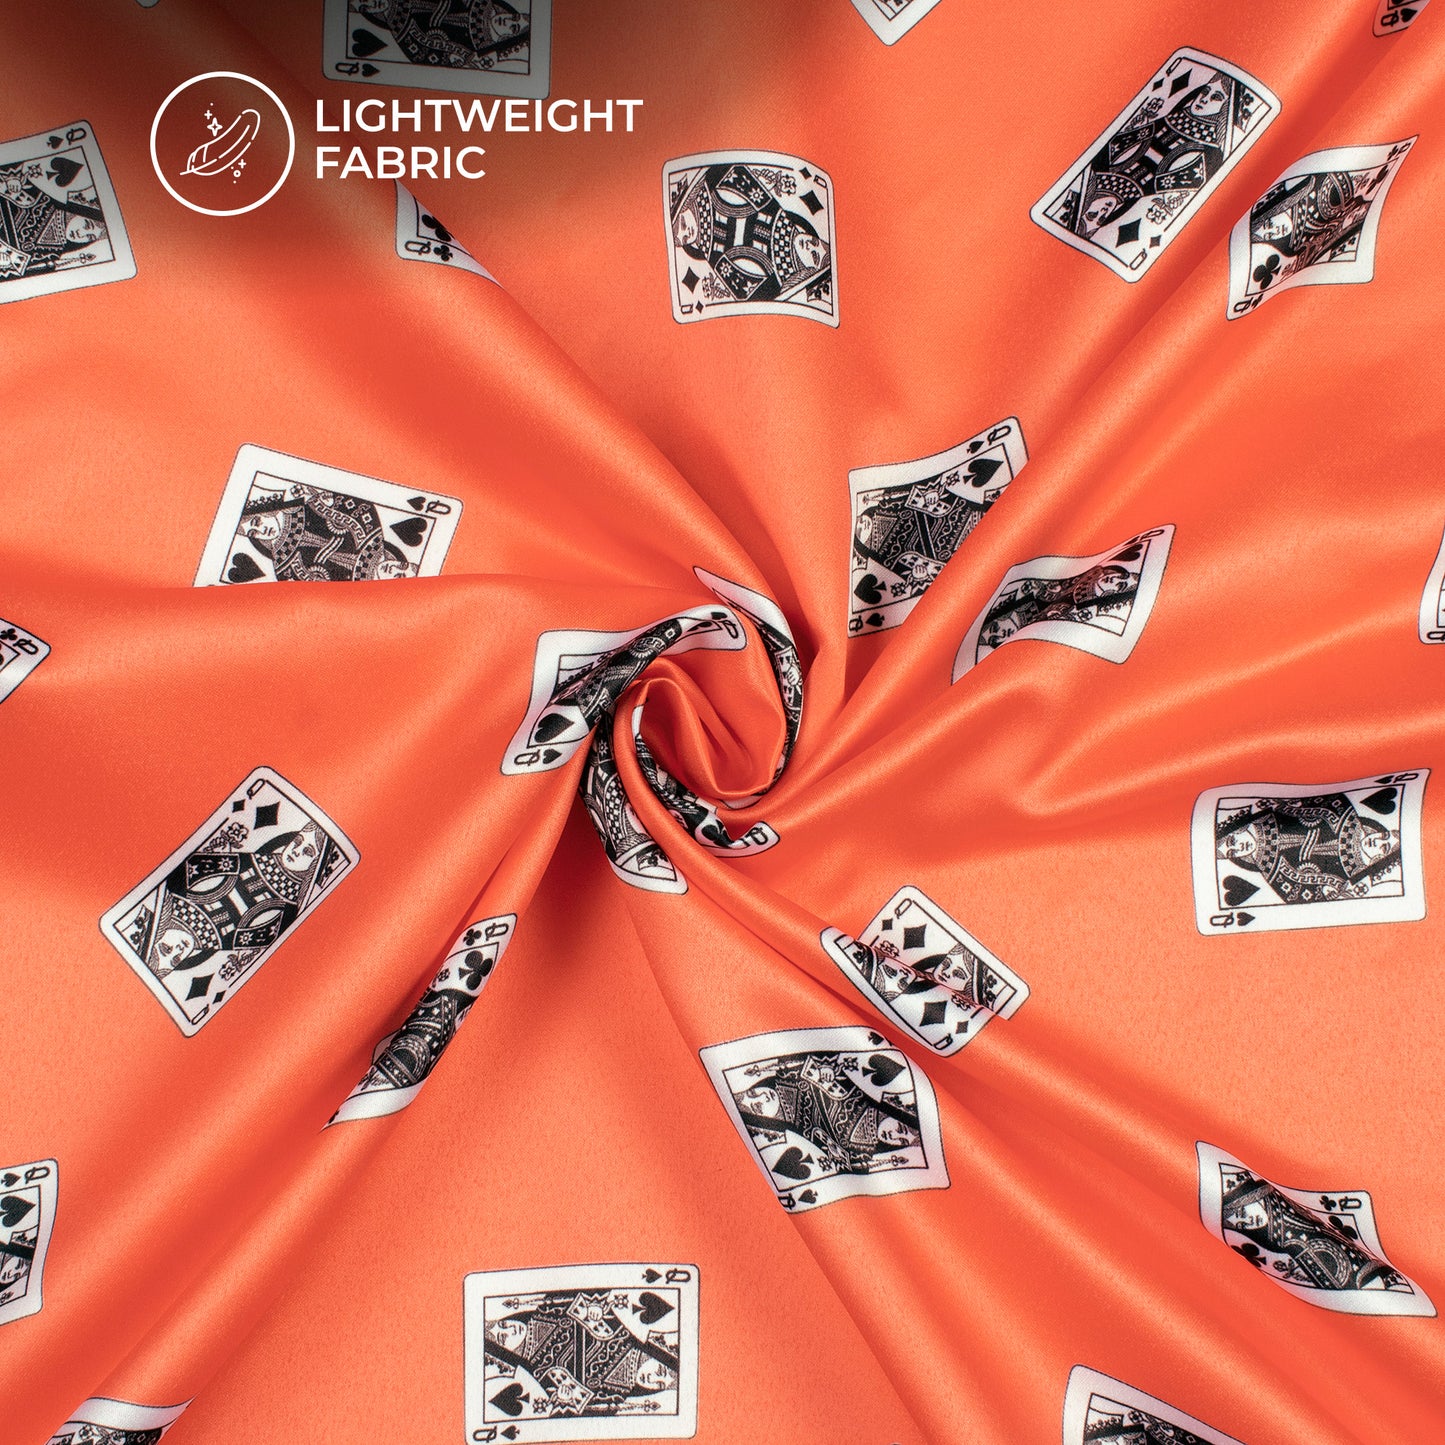 Fire Orange Quirky Digital Print Charmeuse Satin Fabric (Width 58 Inches)